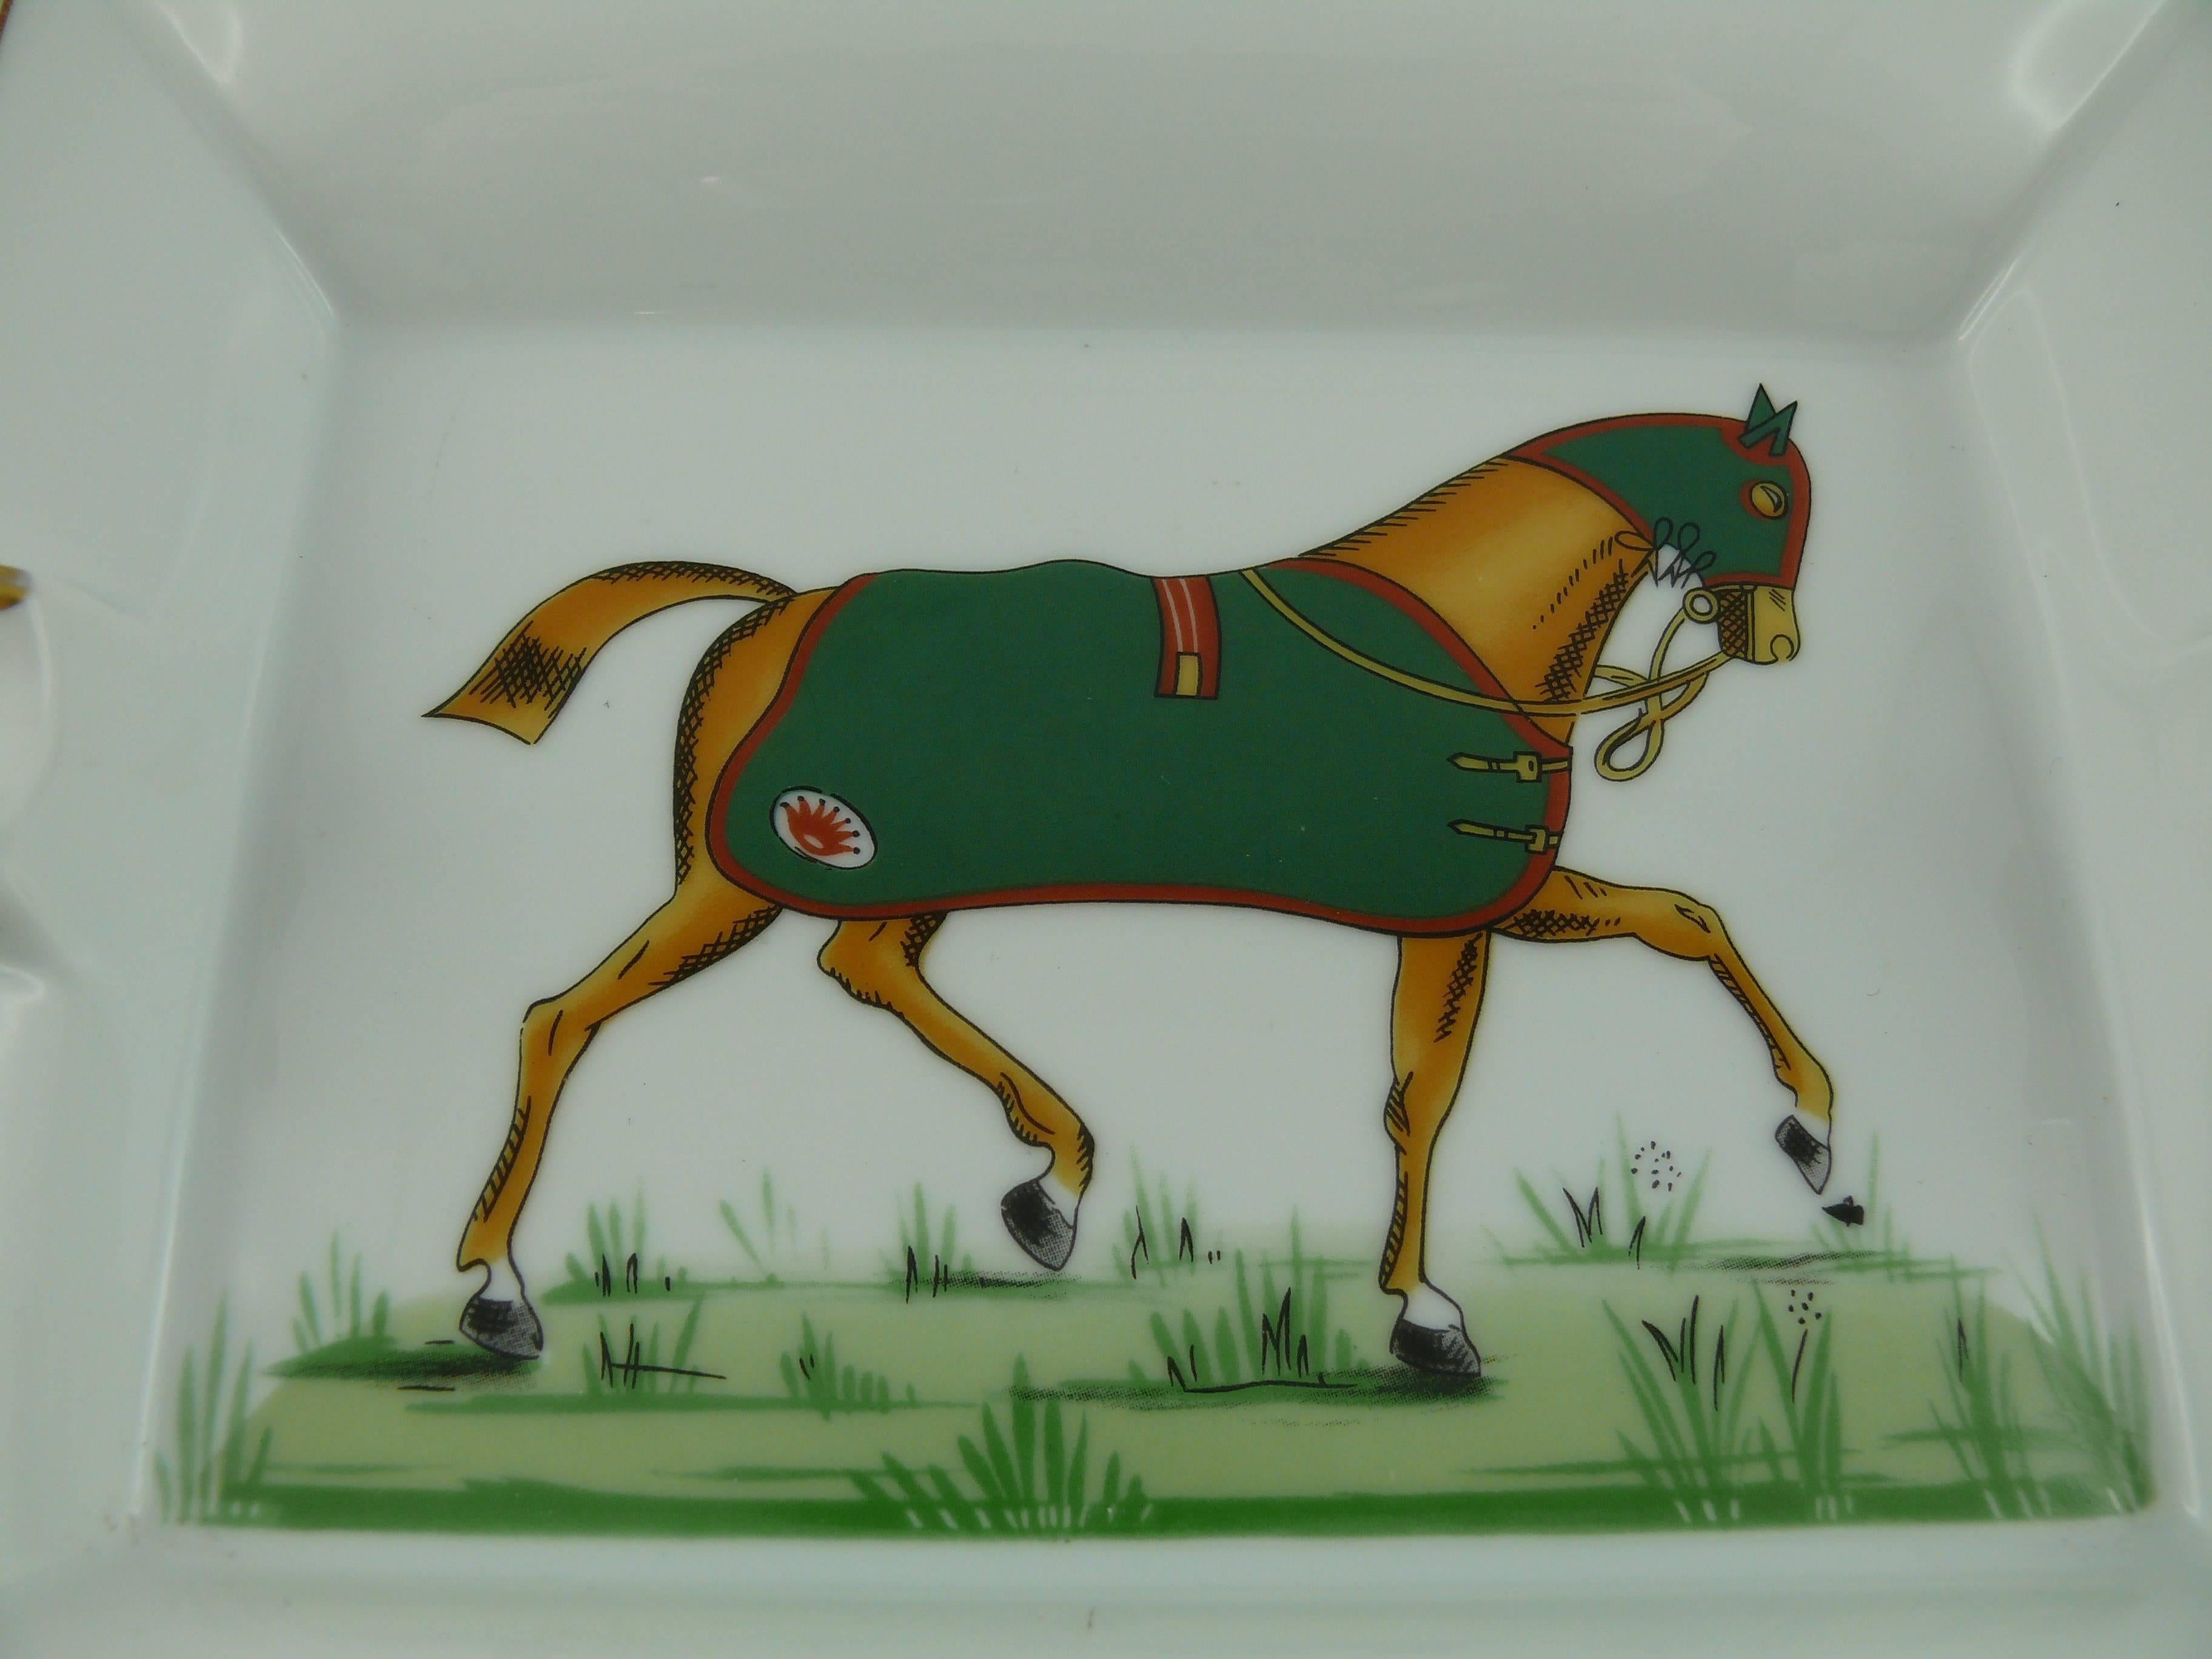 HERMES Paris large white porcelain cigar ashtray or pin tray printed with exquisite multi colored equestrian image. 

Green, yellow and gilt geometrical rims.

Marked HERMES Paris and Made in France.

Note
As a buyer, you are fully